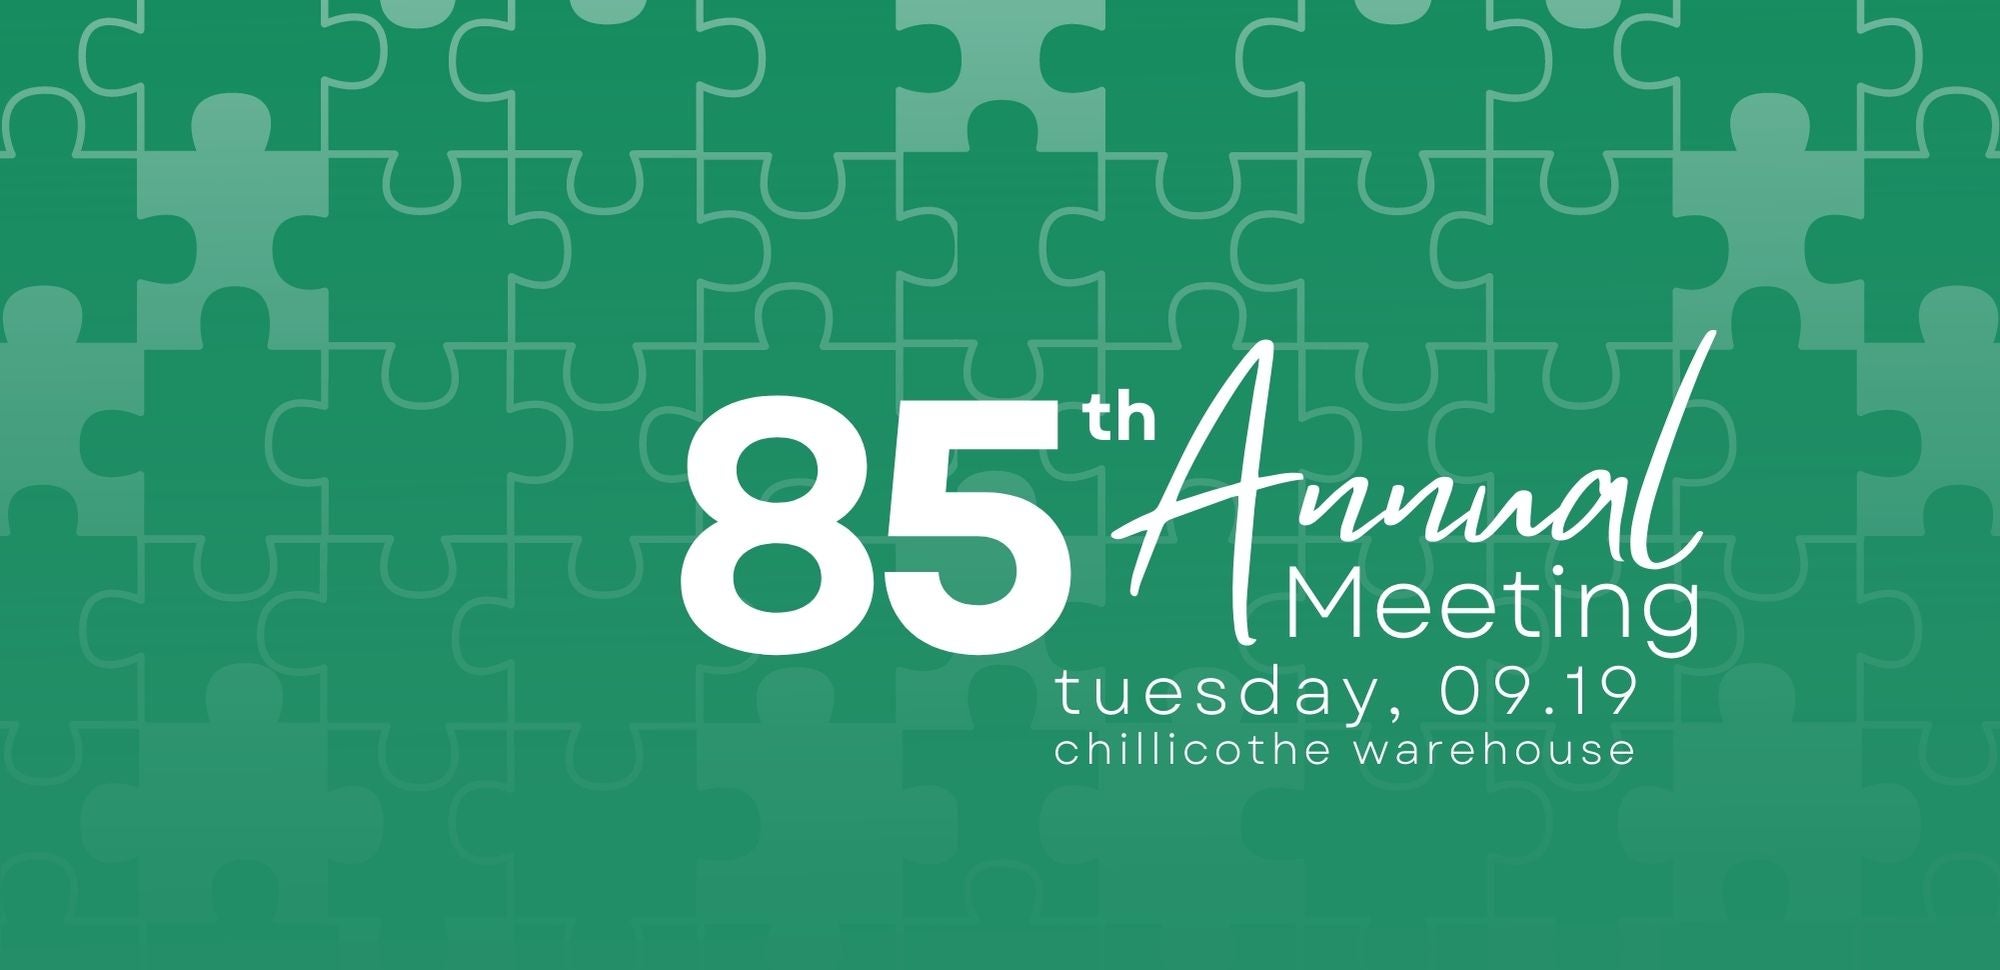 85th Annual Meeting, Tuesday, September 9, Chillicothe warehouse